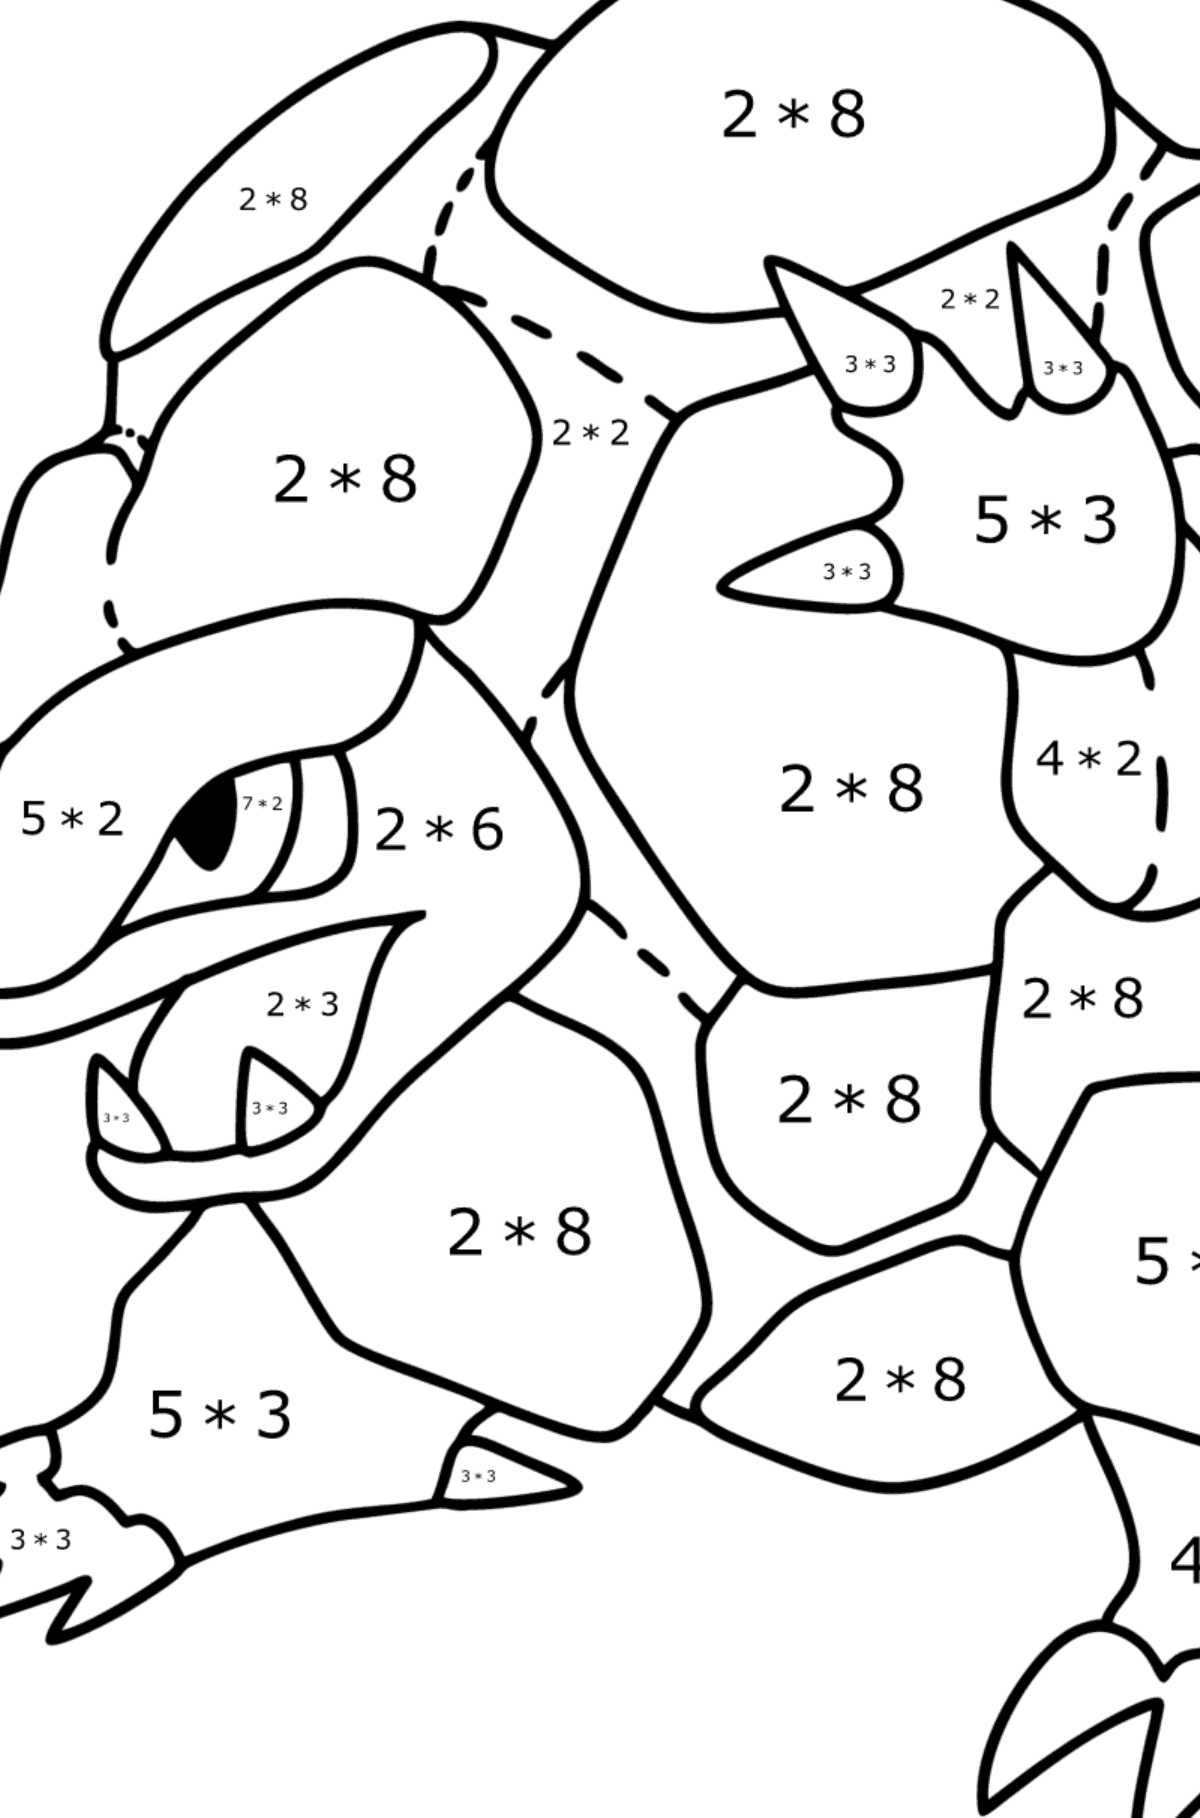 Pokemon Go Golem coloring page - Math Coloring - Multiplication for Kids